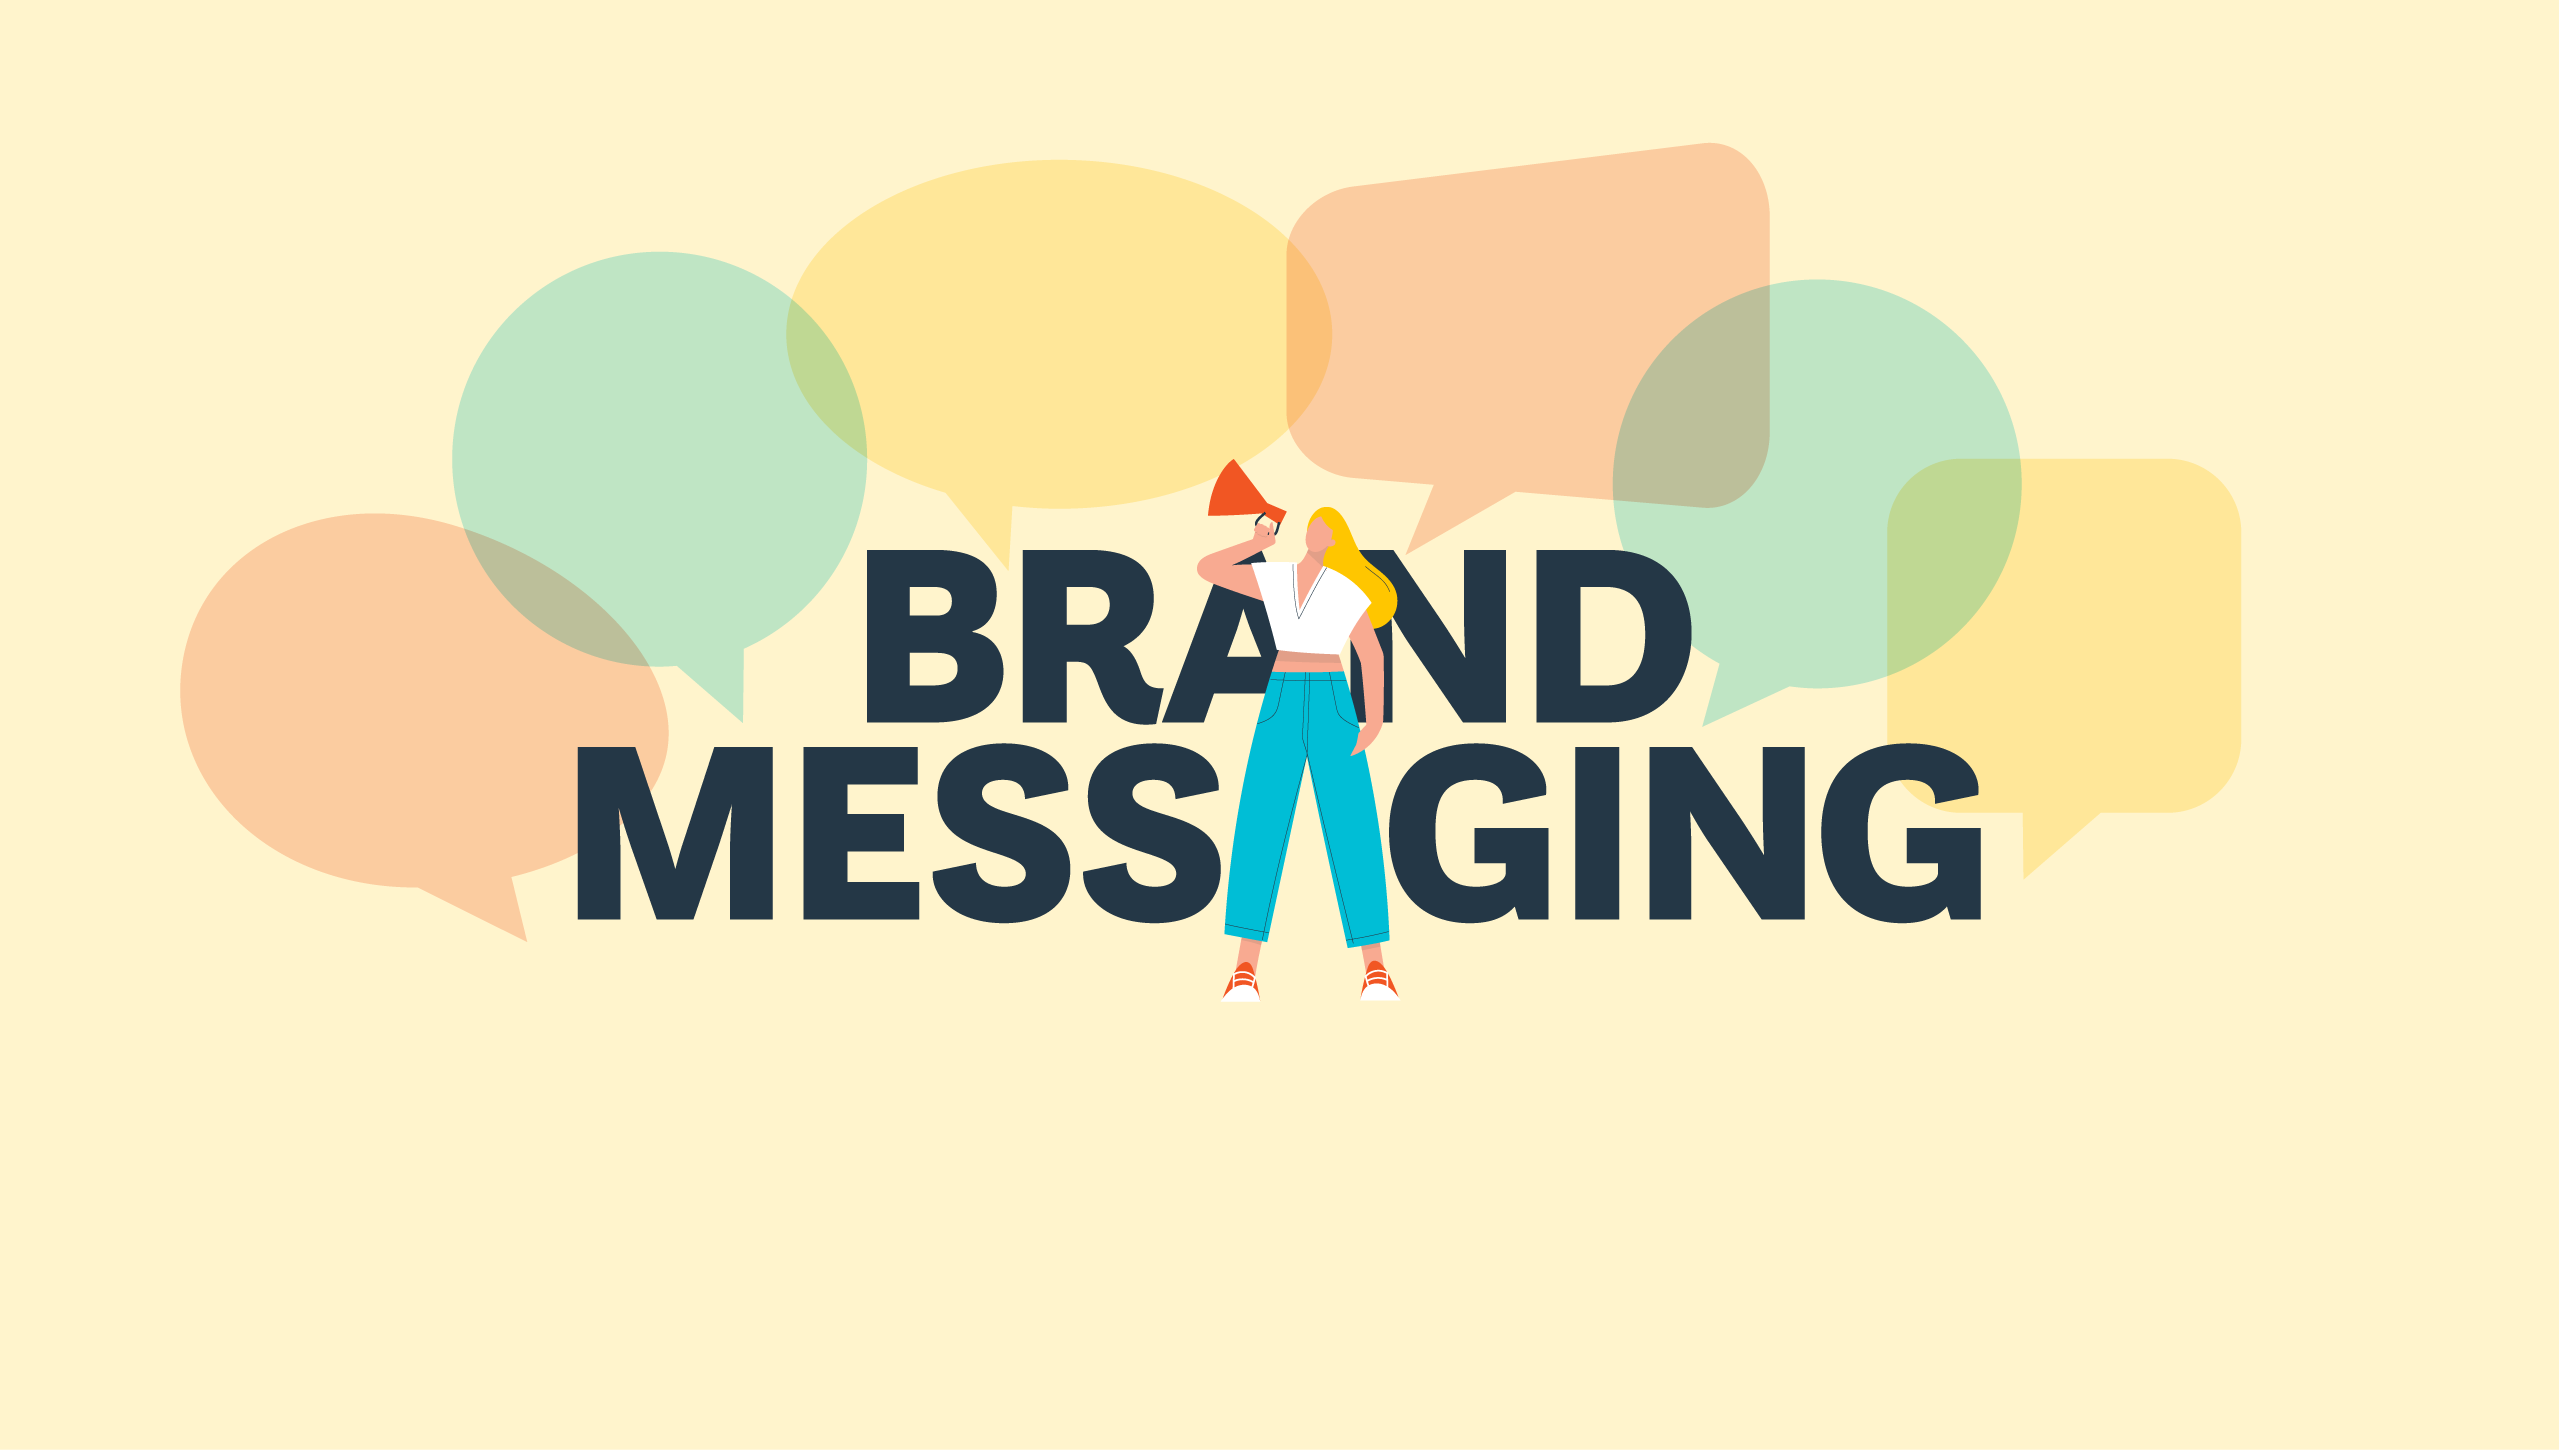 Brand Messaging: Communication that Connects With Your Audience